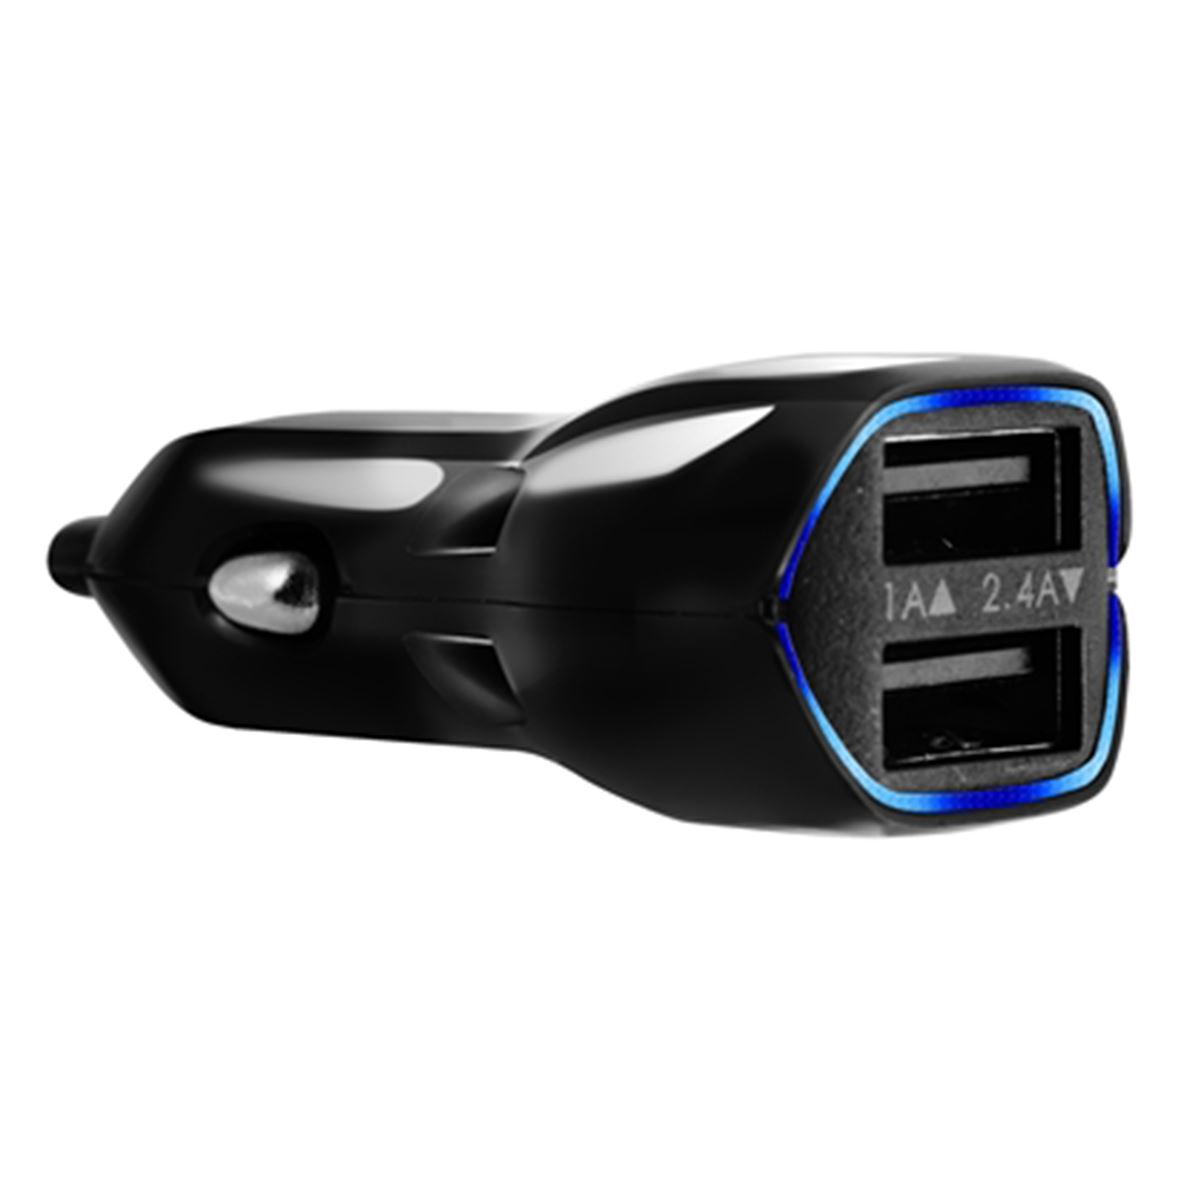 Dual USB Car Charger For Media Tablets & Mobile Phones